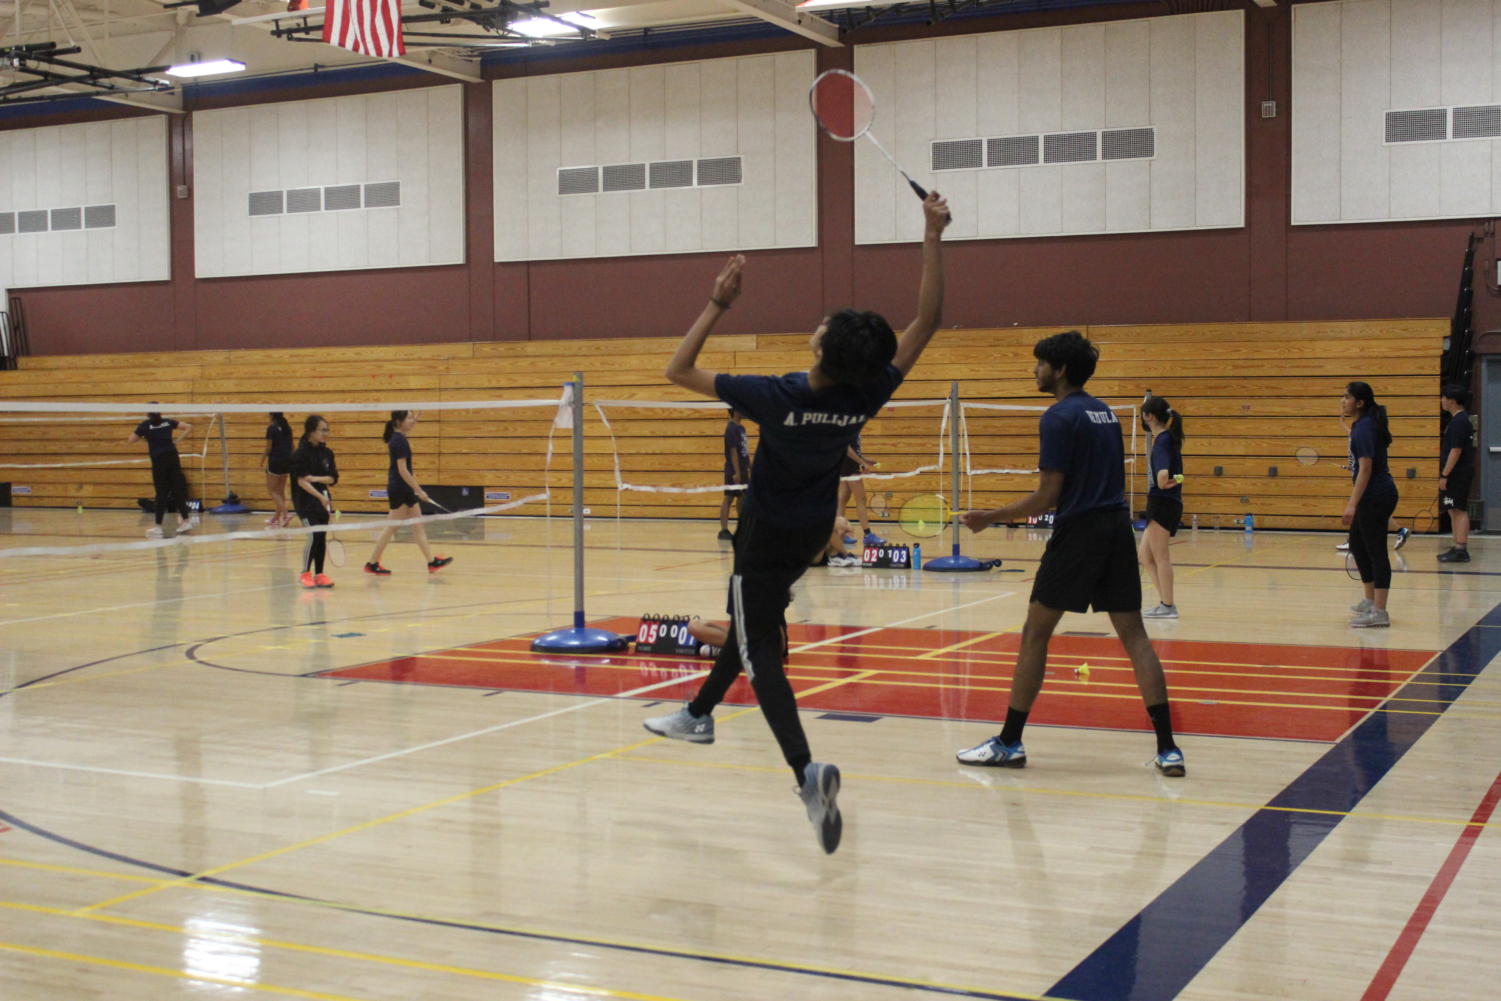 DVHS+badminton+team+receives+first+funding+from+school+district